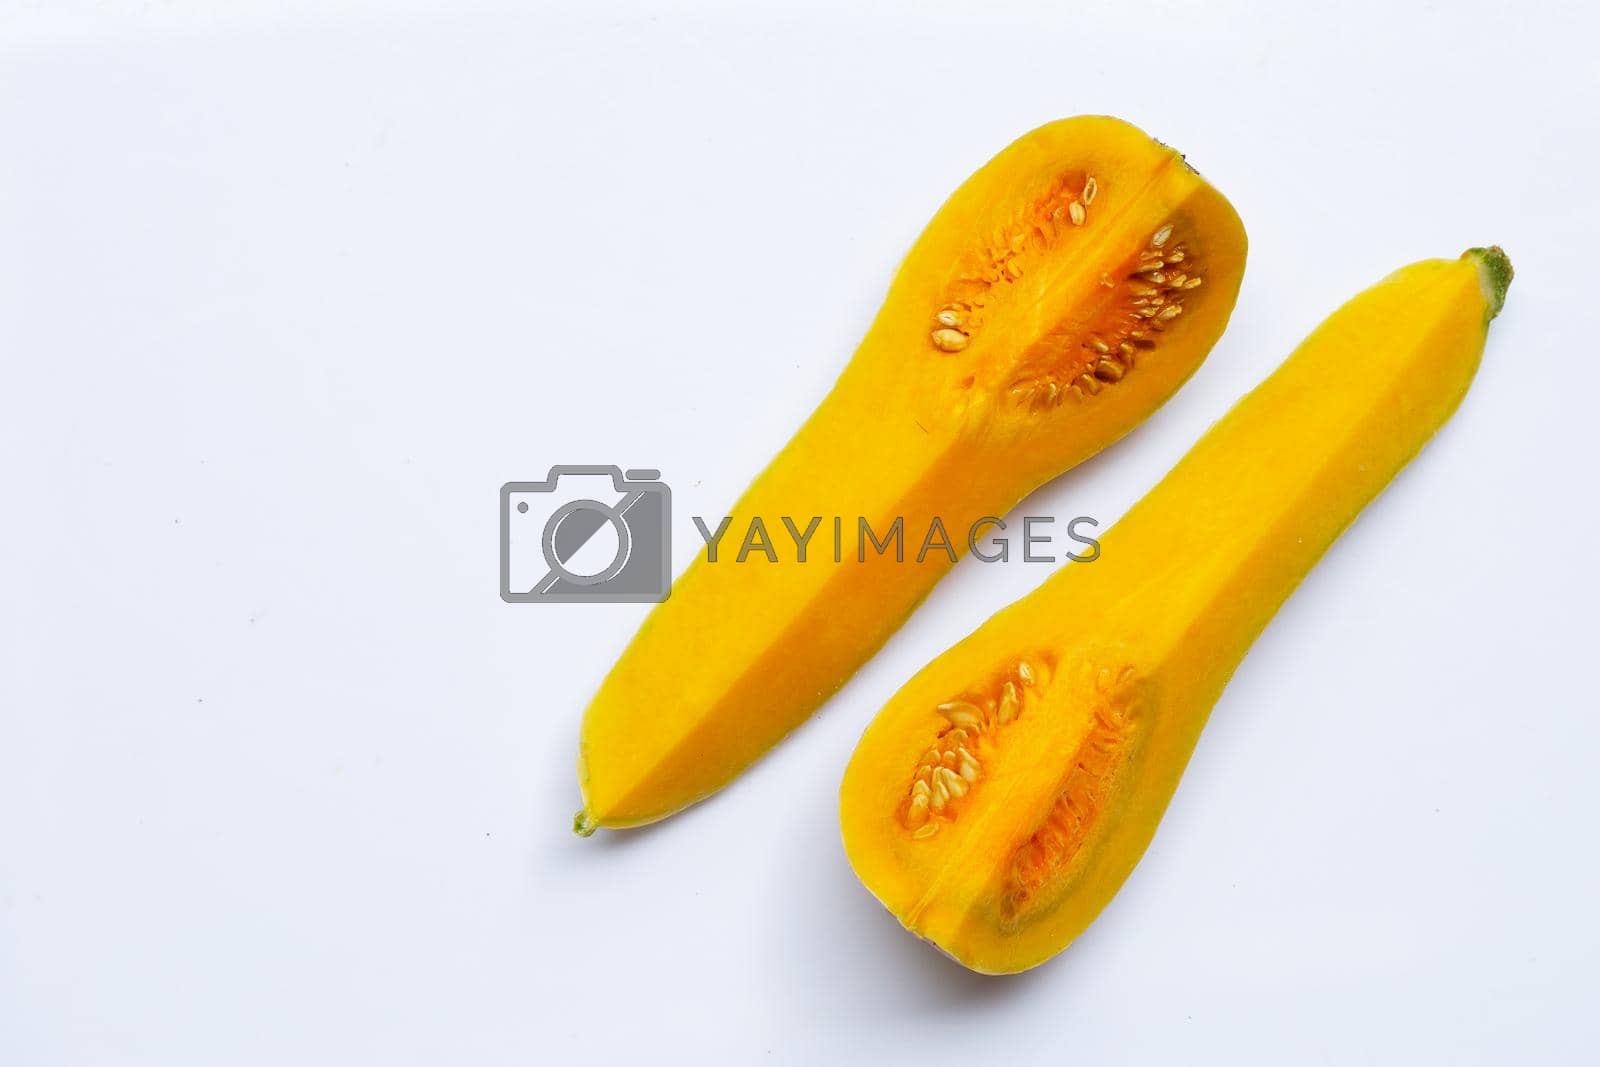 Royalty free image of Cut and slices butternut squash on white background. by Bowonpat